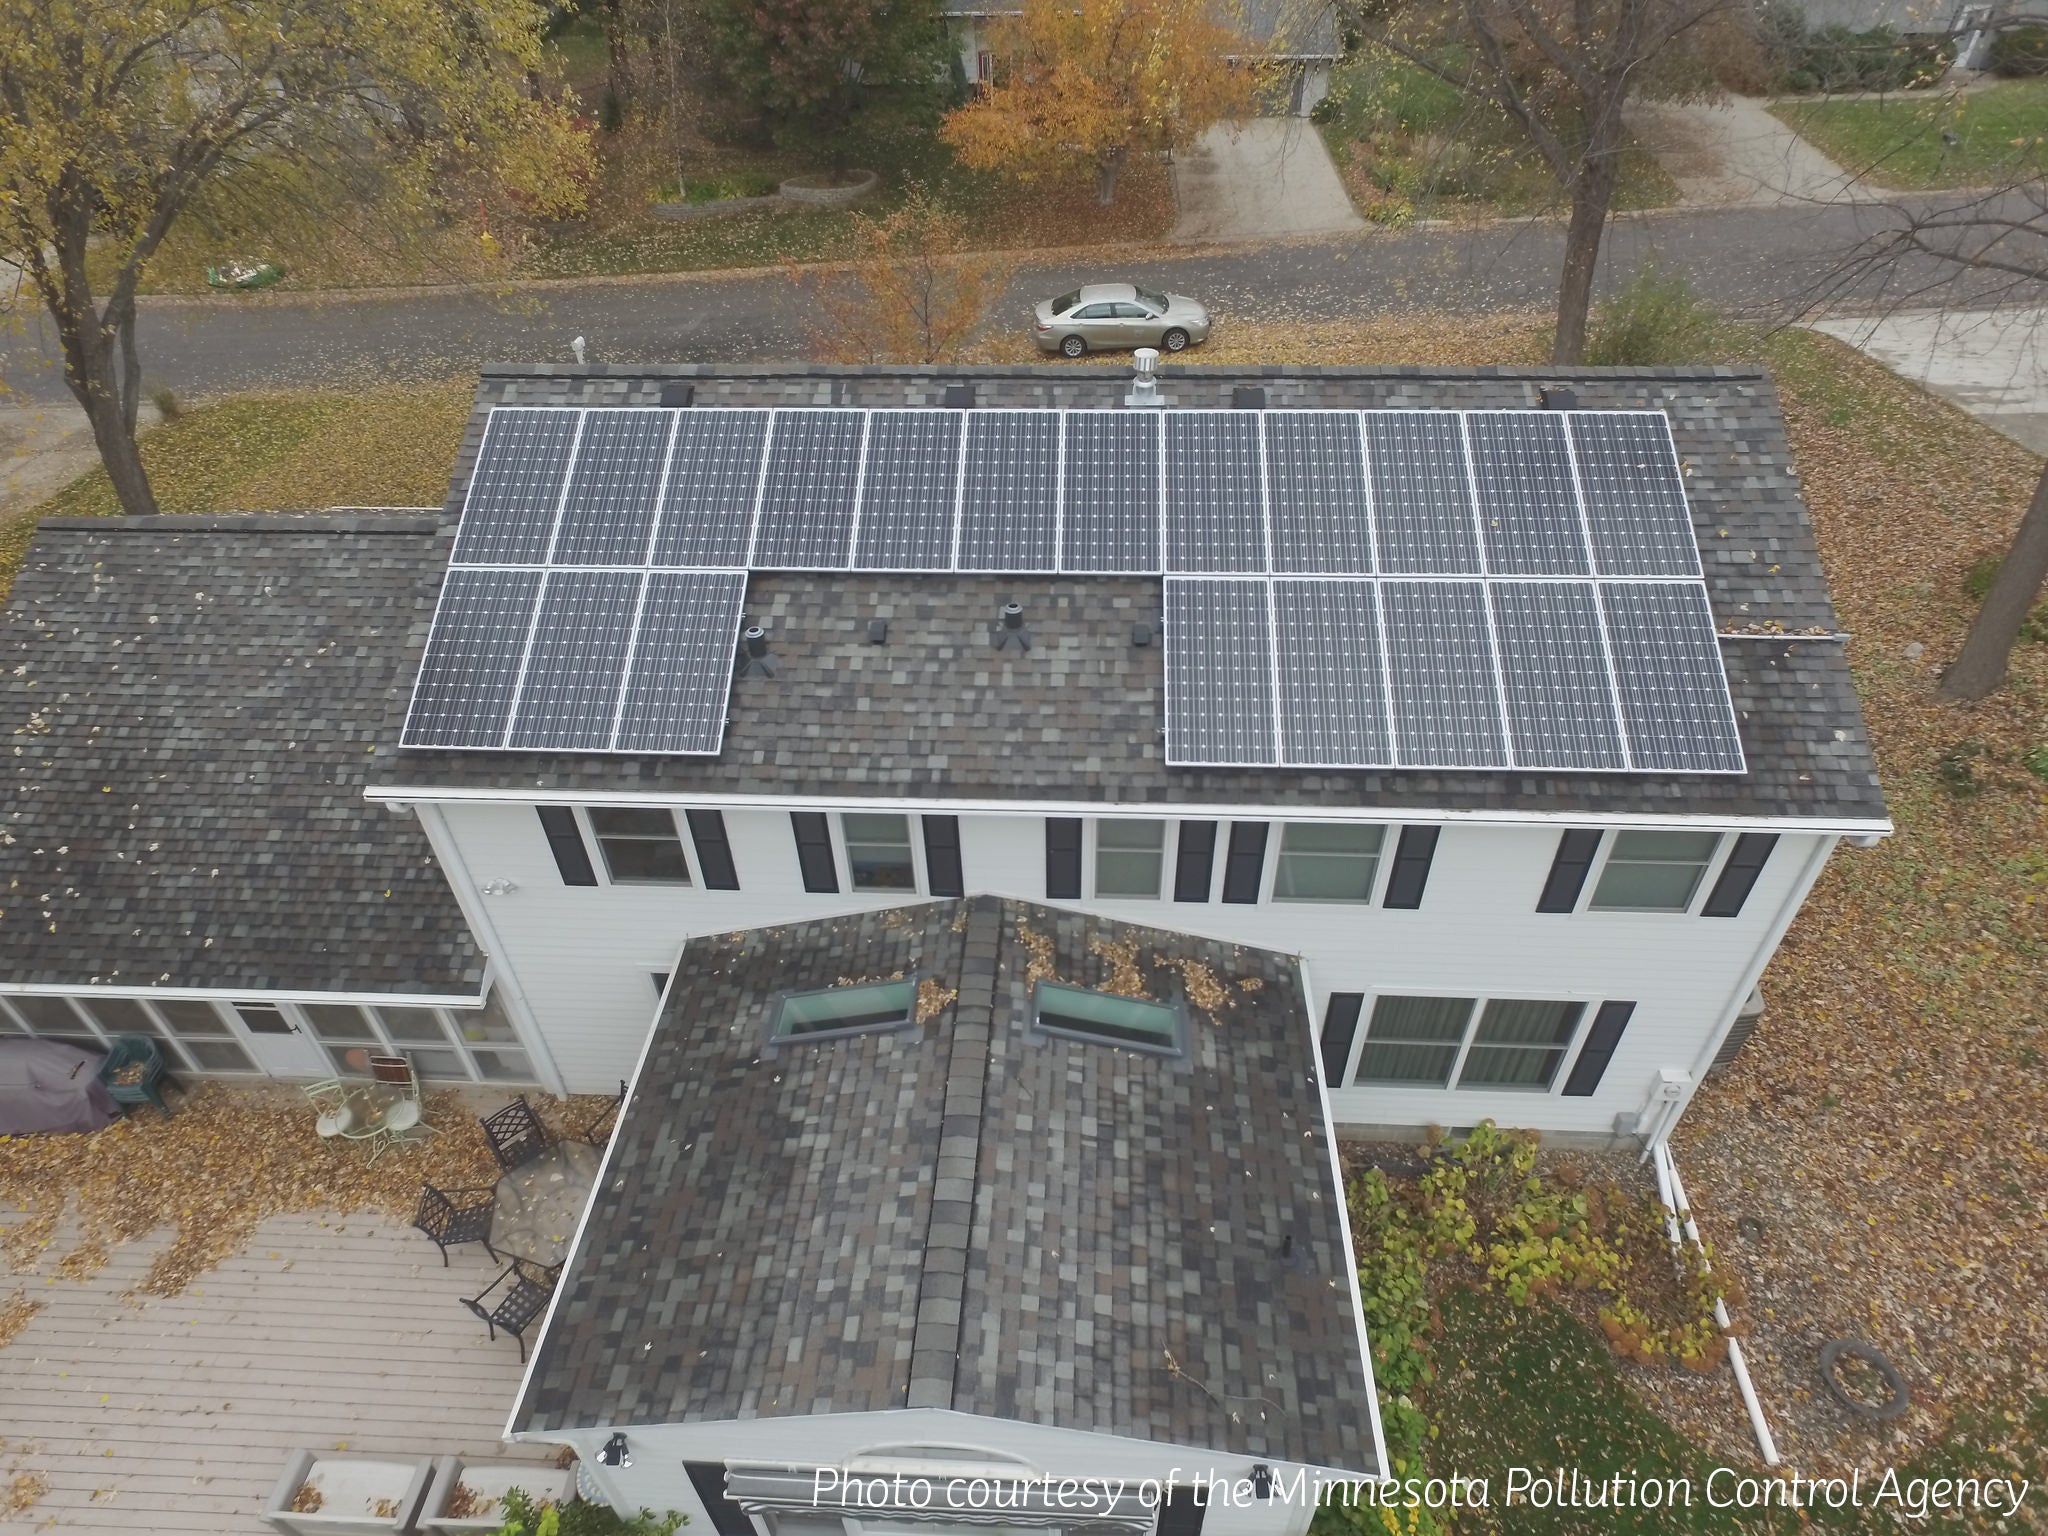 minnesota-solar-to-take-a-hit-due-to-new-building-code